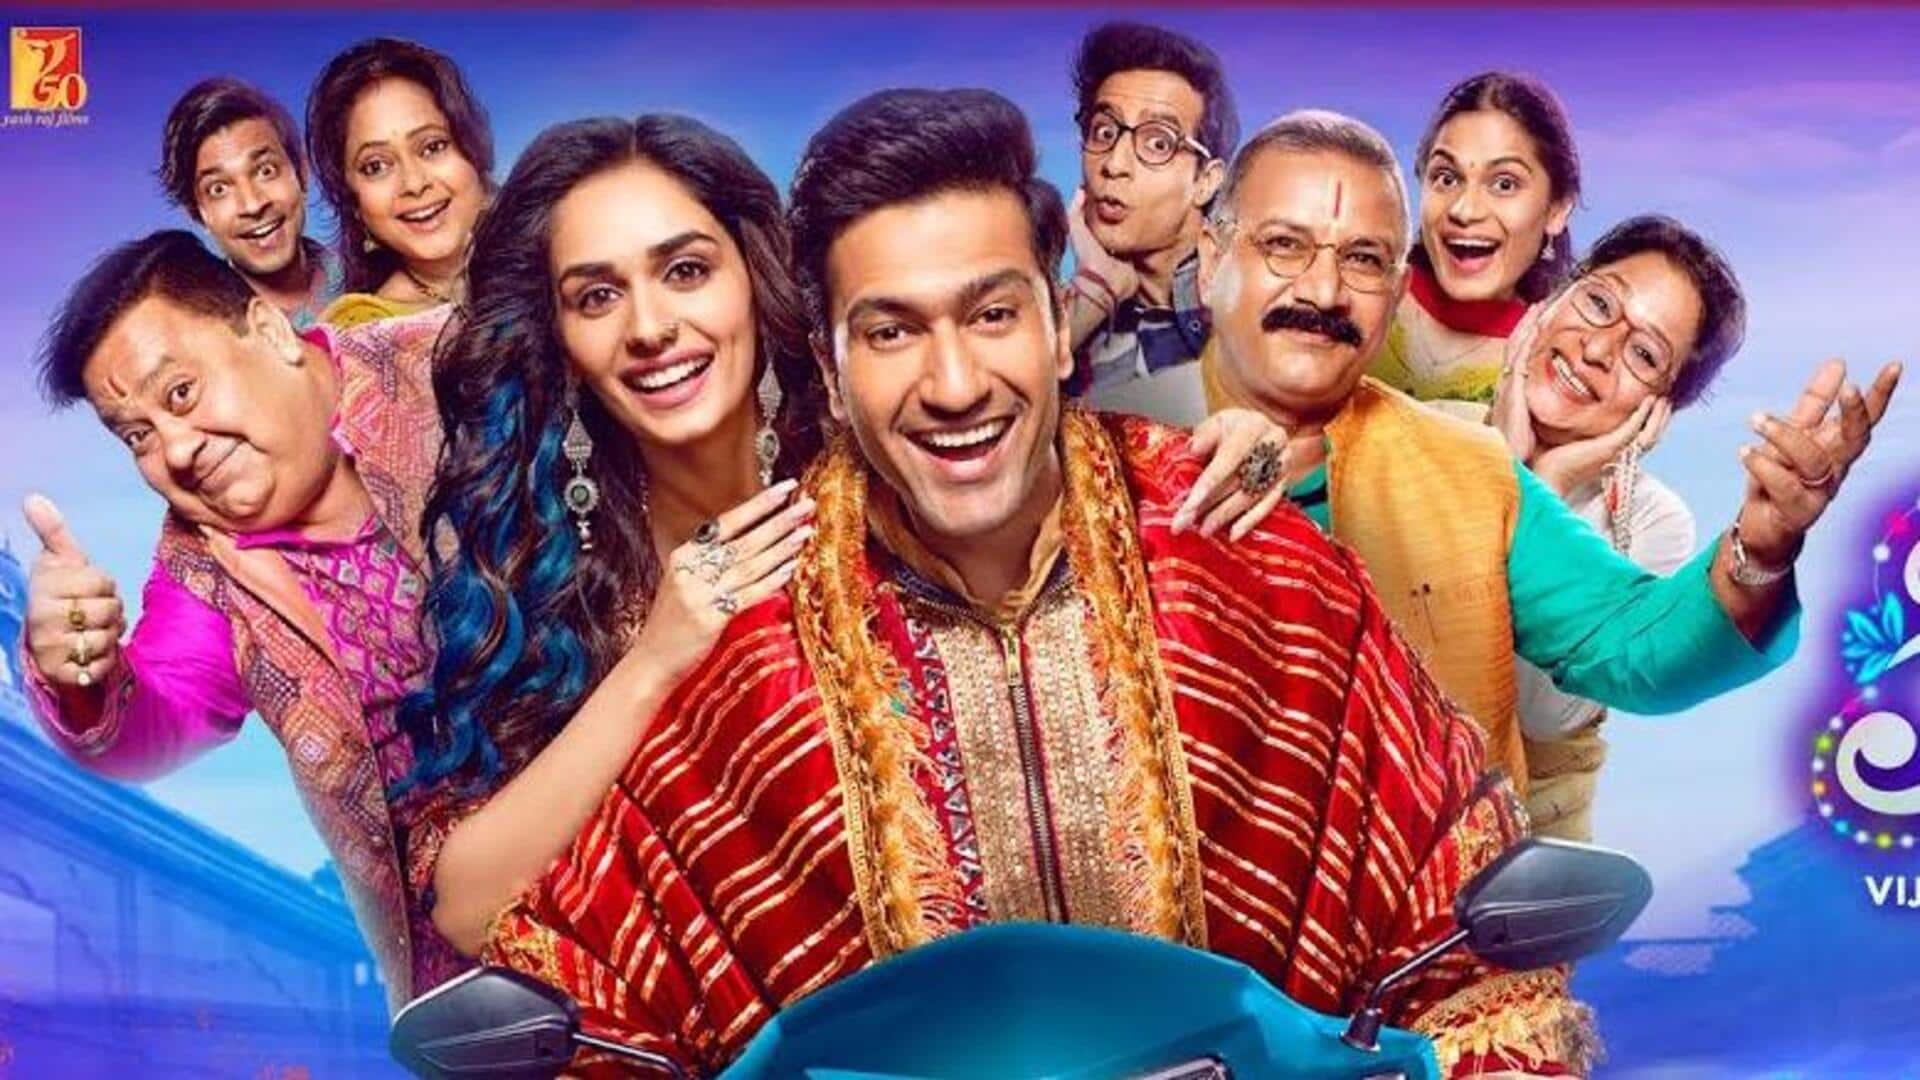 Box office collection: 'The Great Indian Family' registers disappointing opening